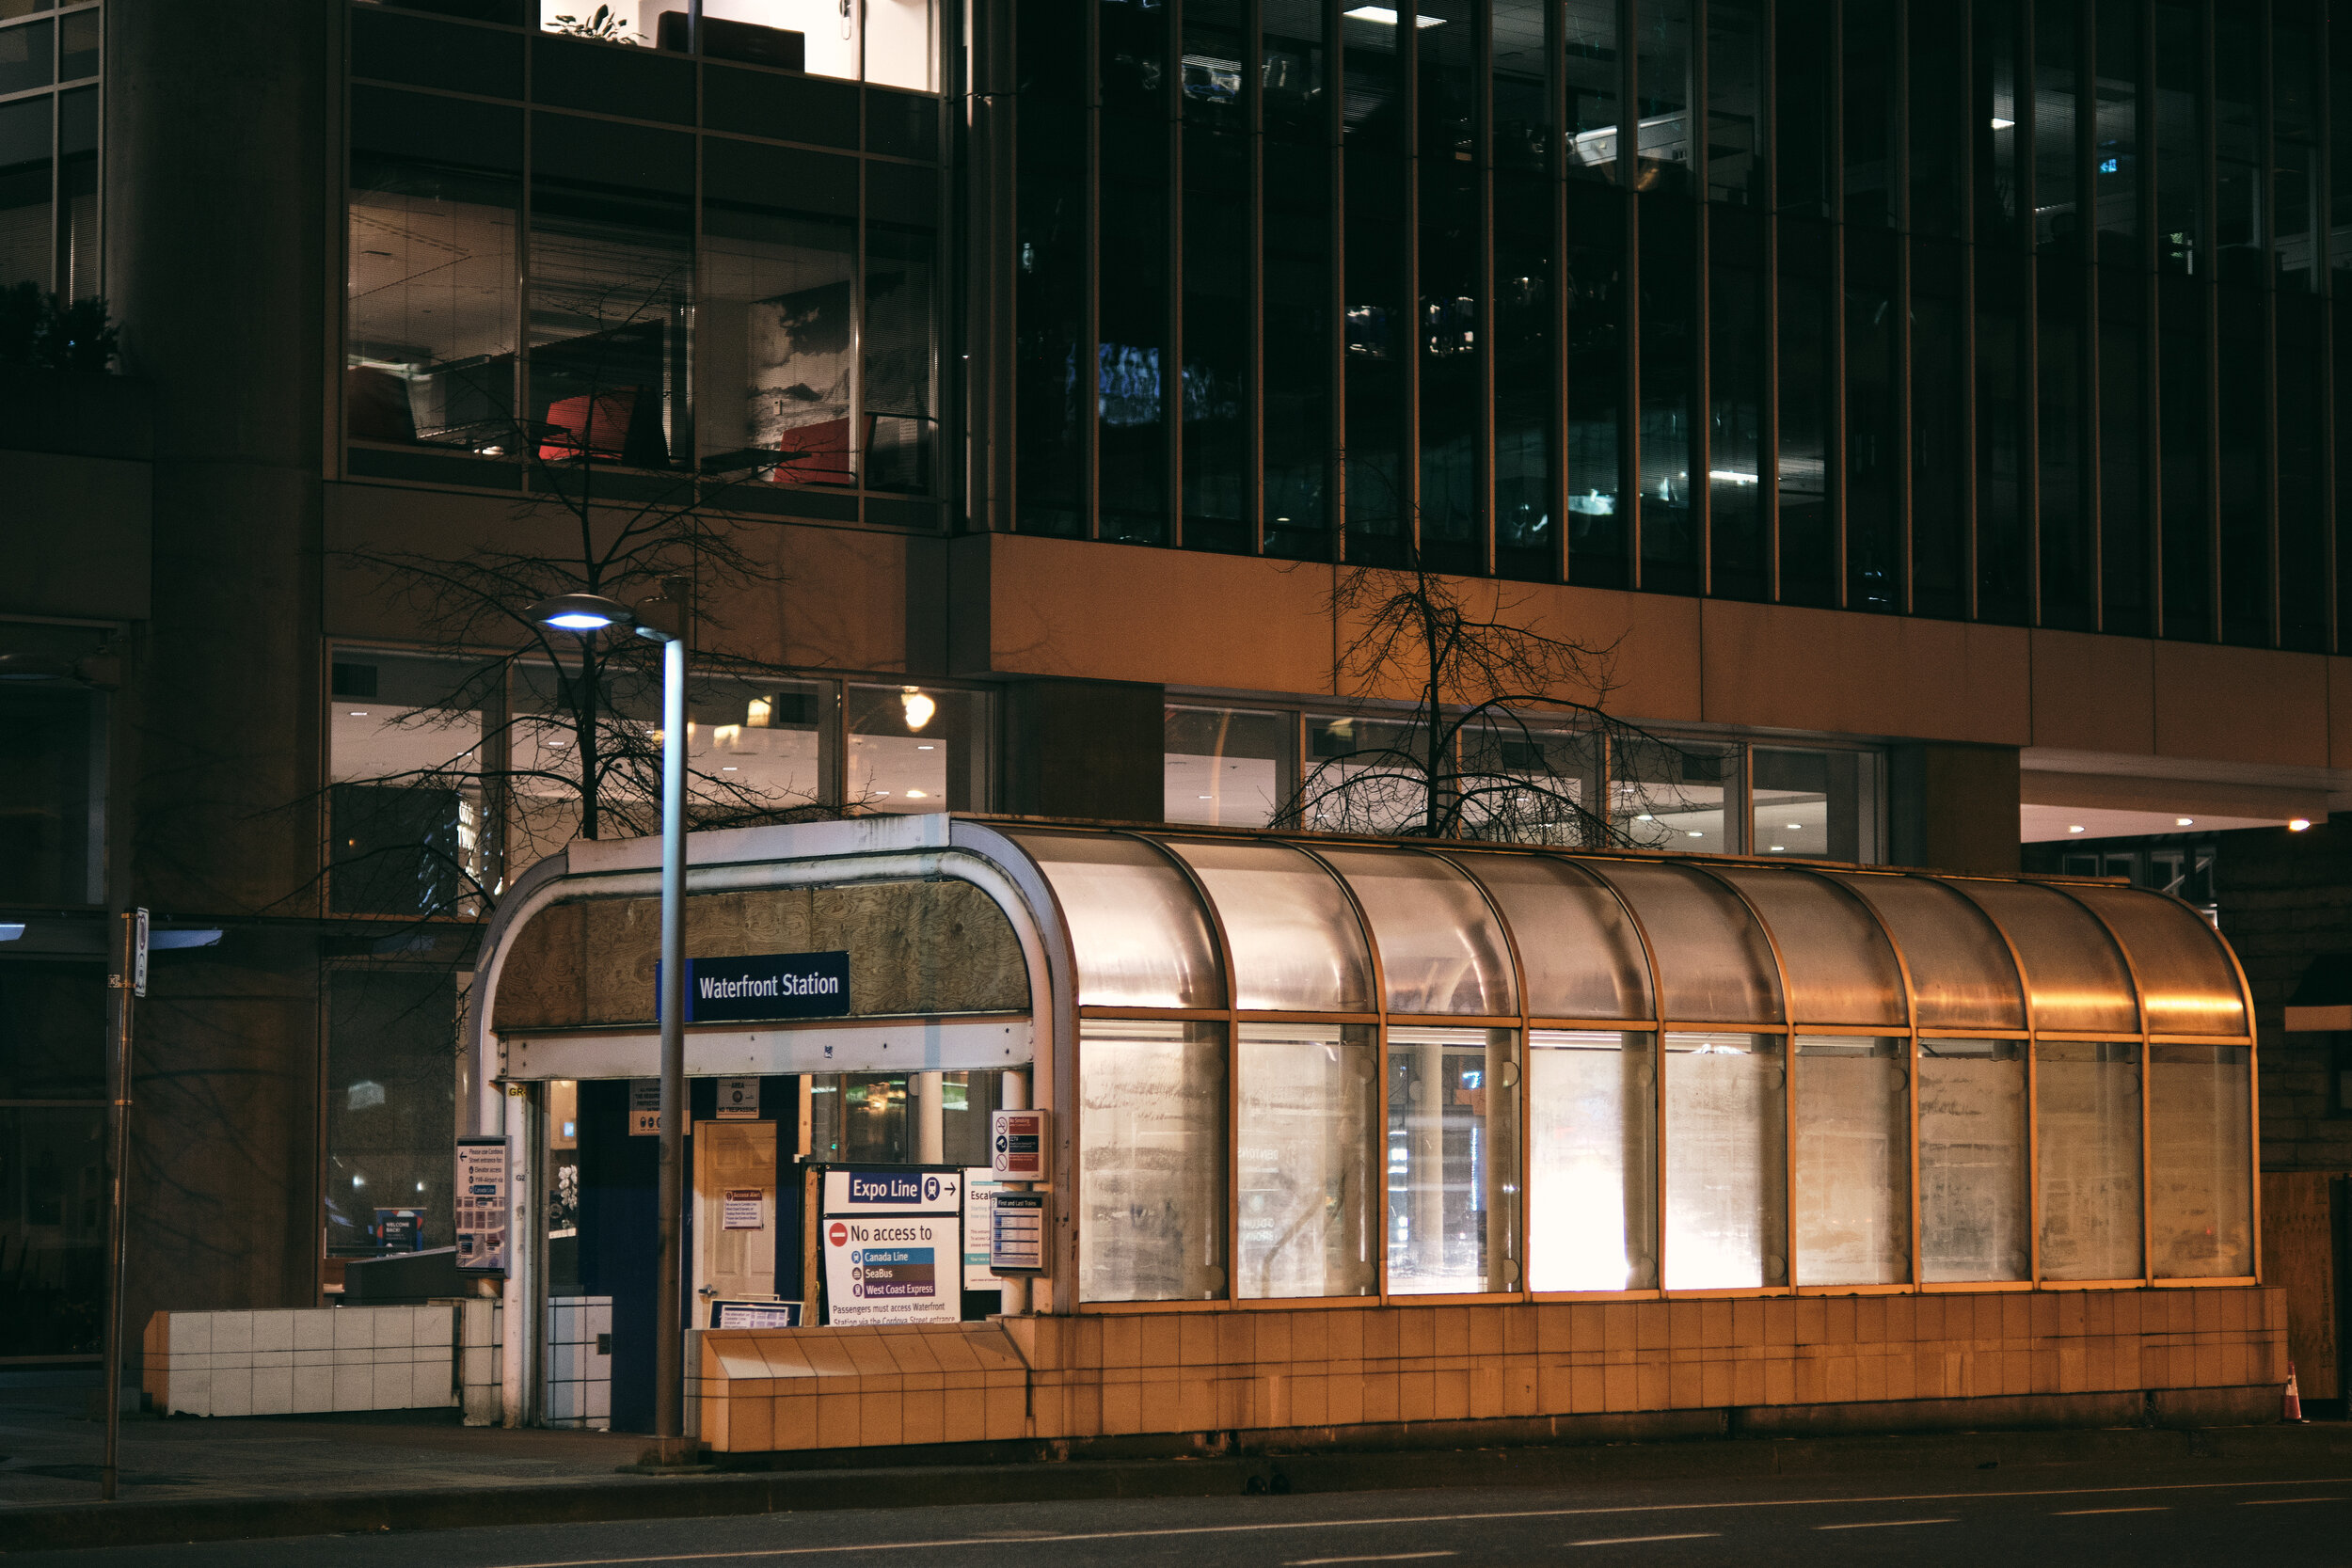 The entrance to Waterfront Station in Vancouver. Sample image from a Fujifilm XF 50mm f/1 R WR